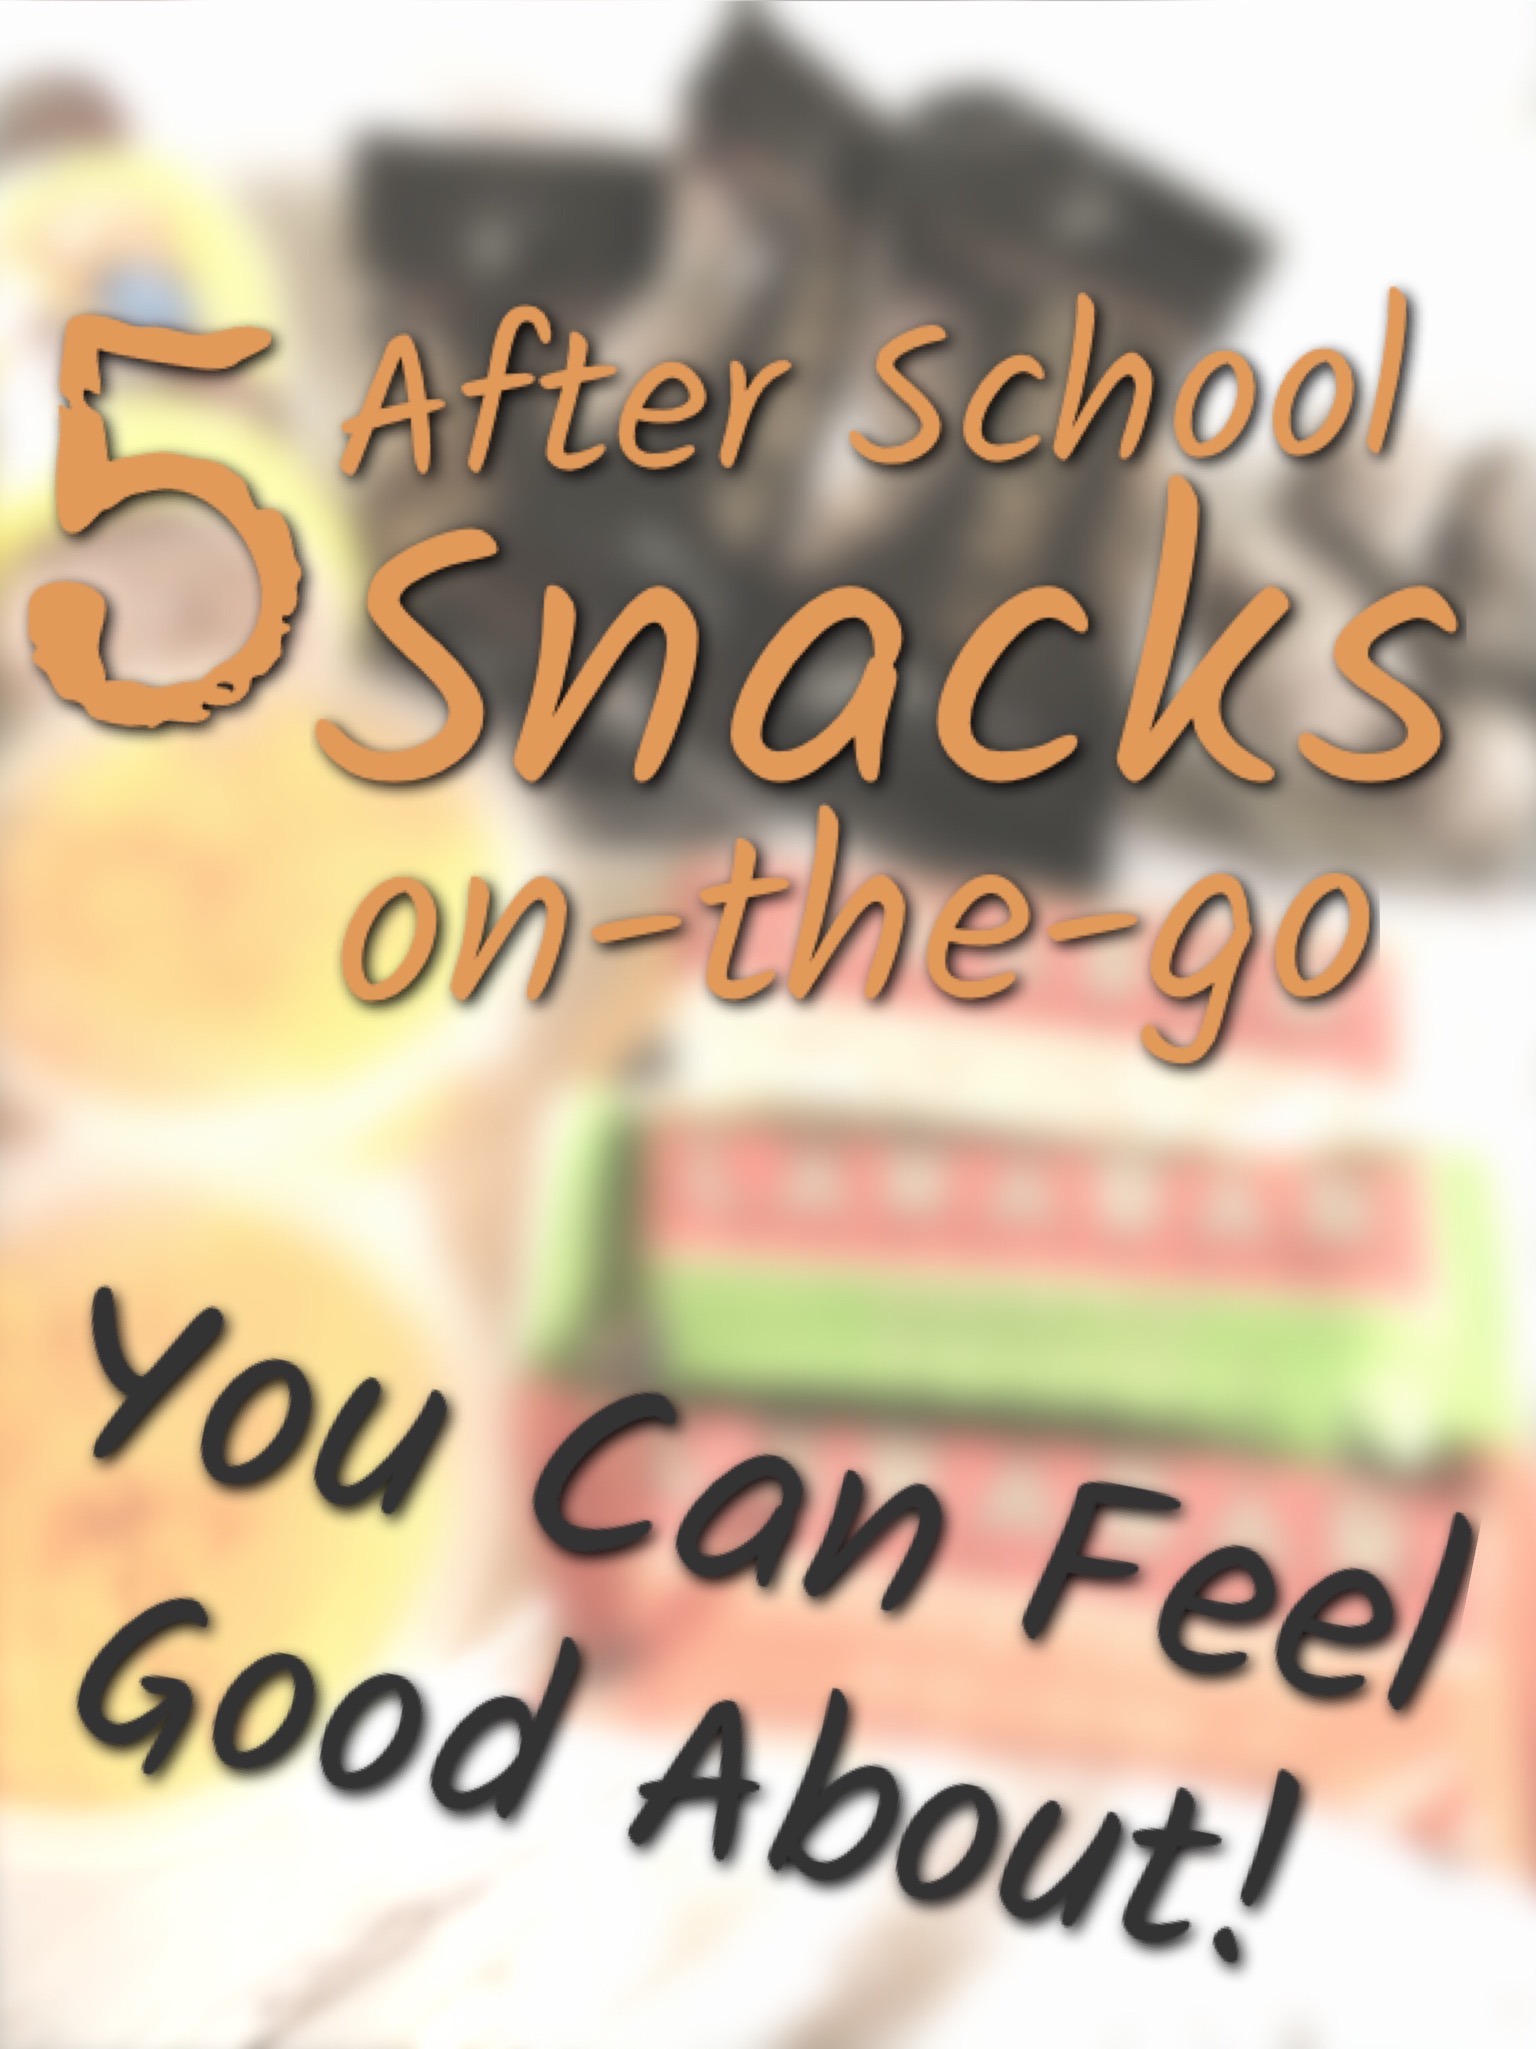 5 After School Snacks On-The-Go That You Can Feel Good About + Giveaway!!!